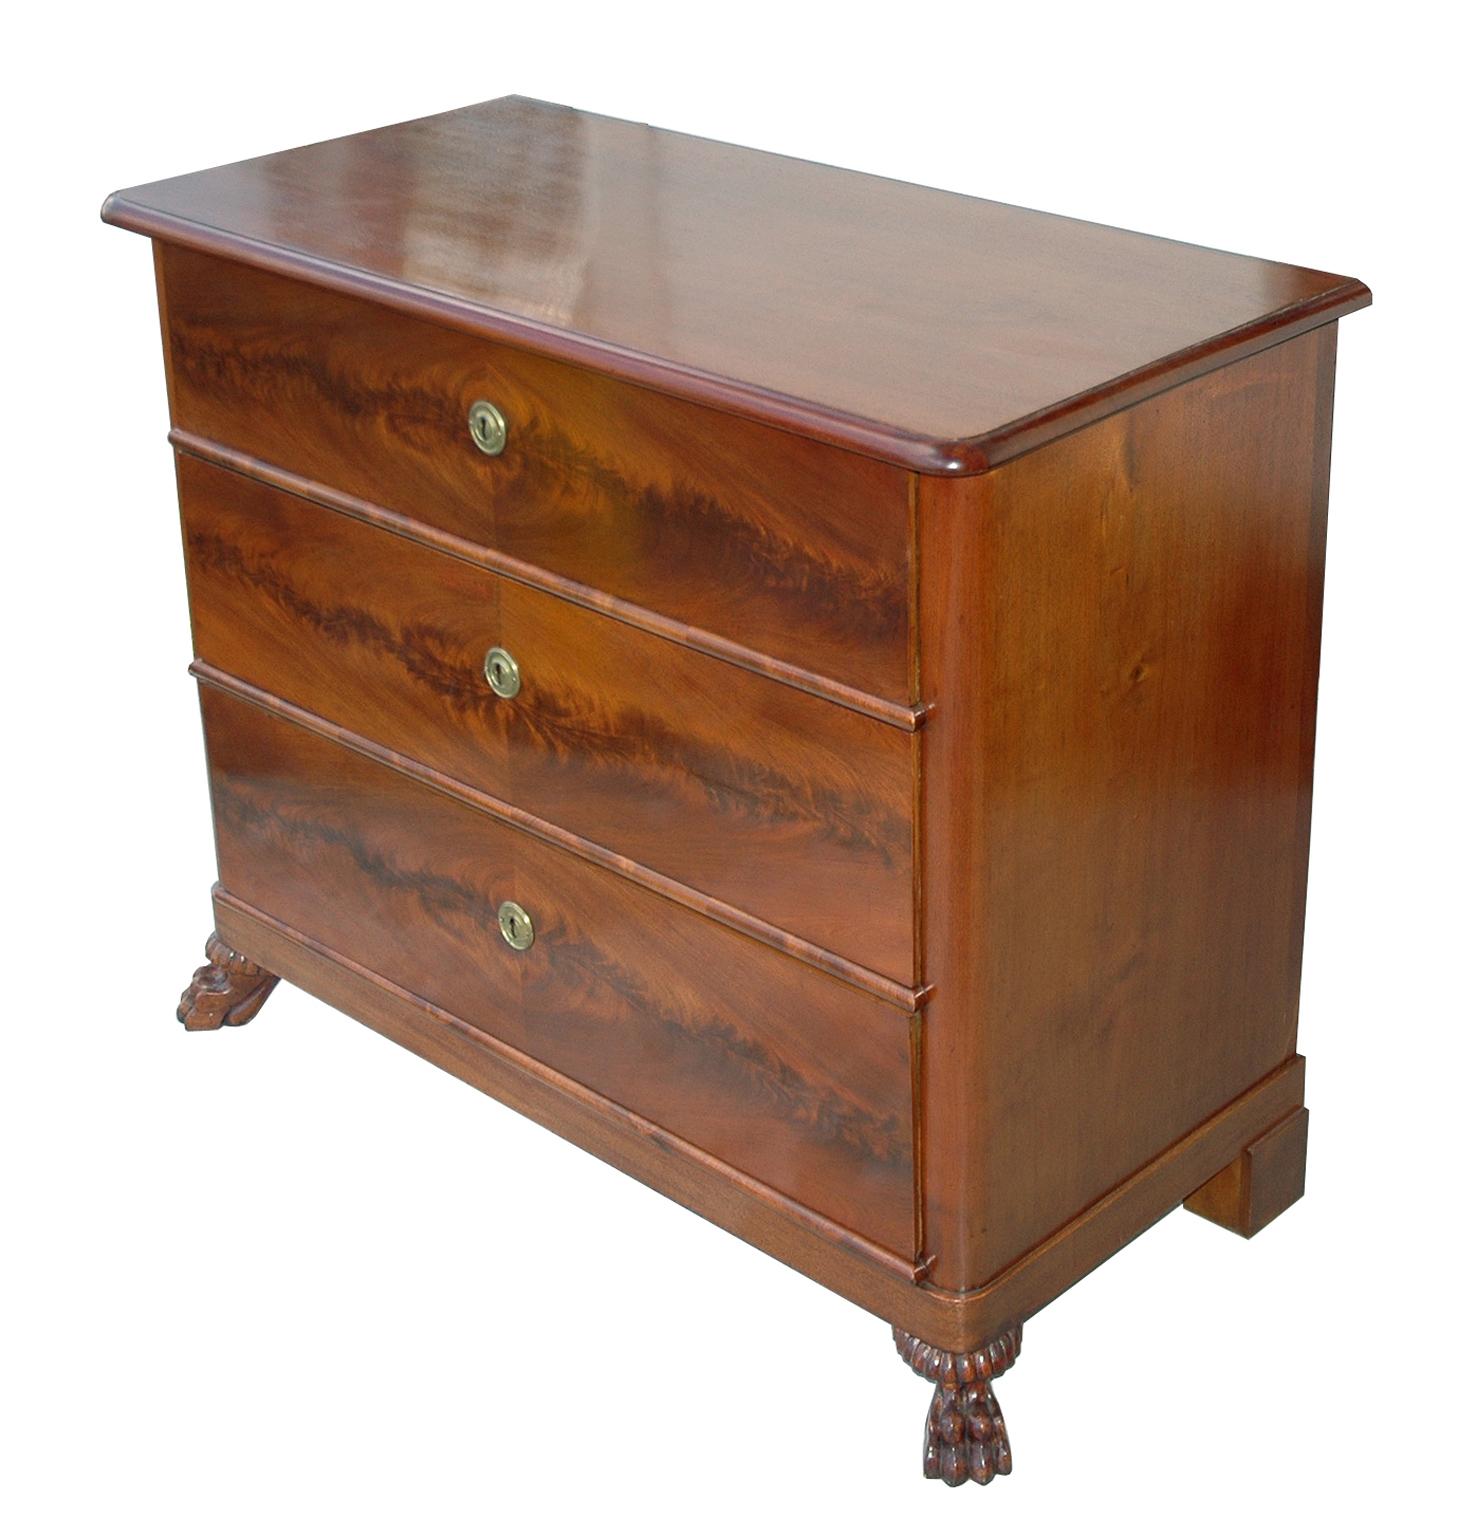 A handsome Empire commode made of fine West Indies (Cuban) mahogany with book-matched flame mahogany veneers on the drawer fronts. This chest offers three large storage drawers and rests on carved lion's paw feet. Restored with French-polish in our